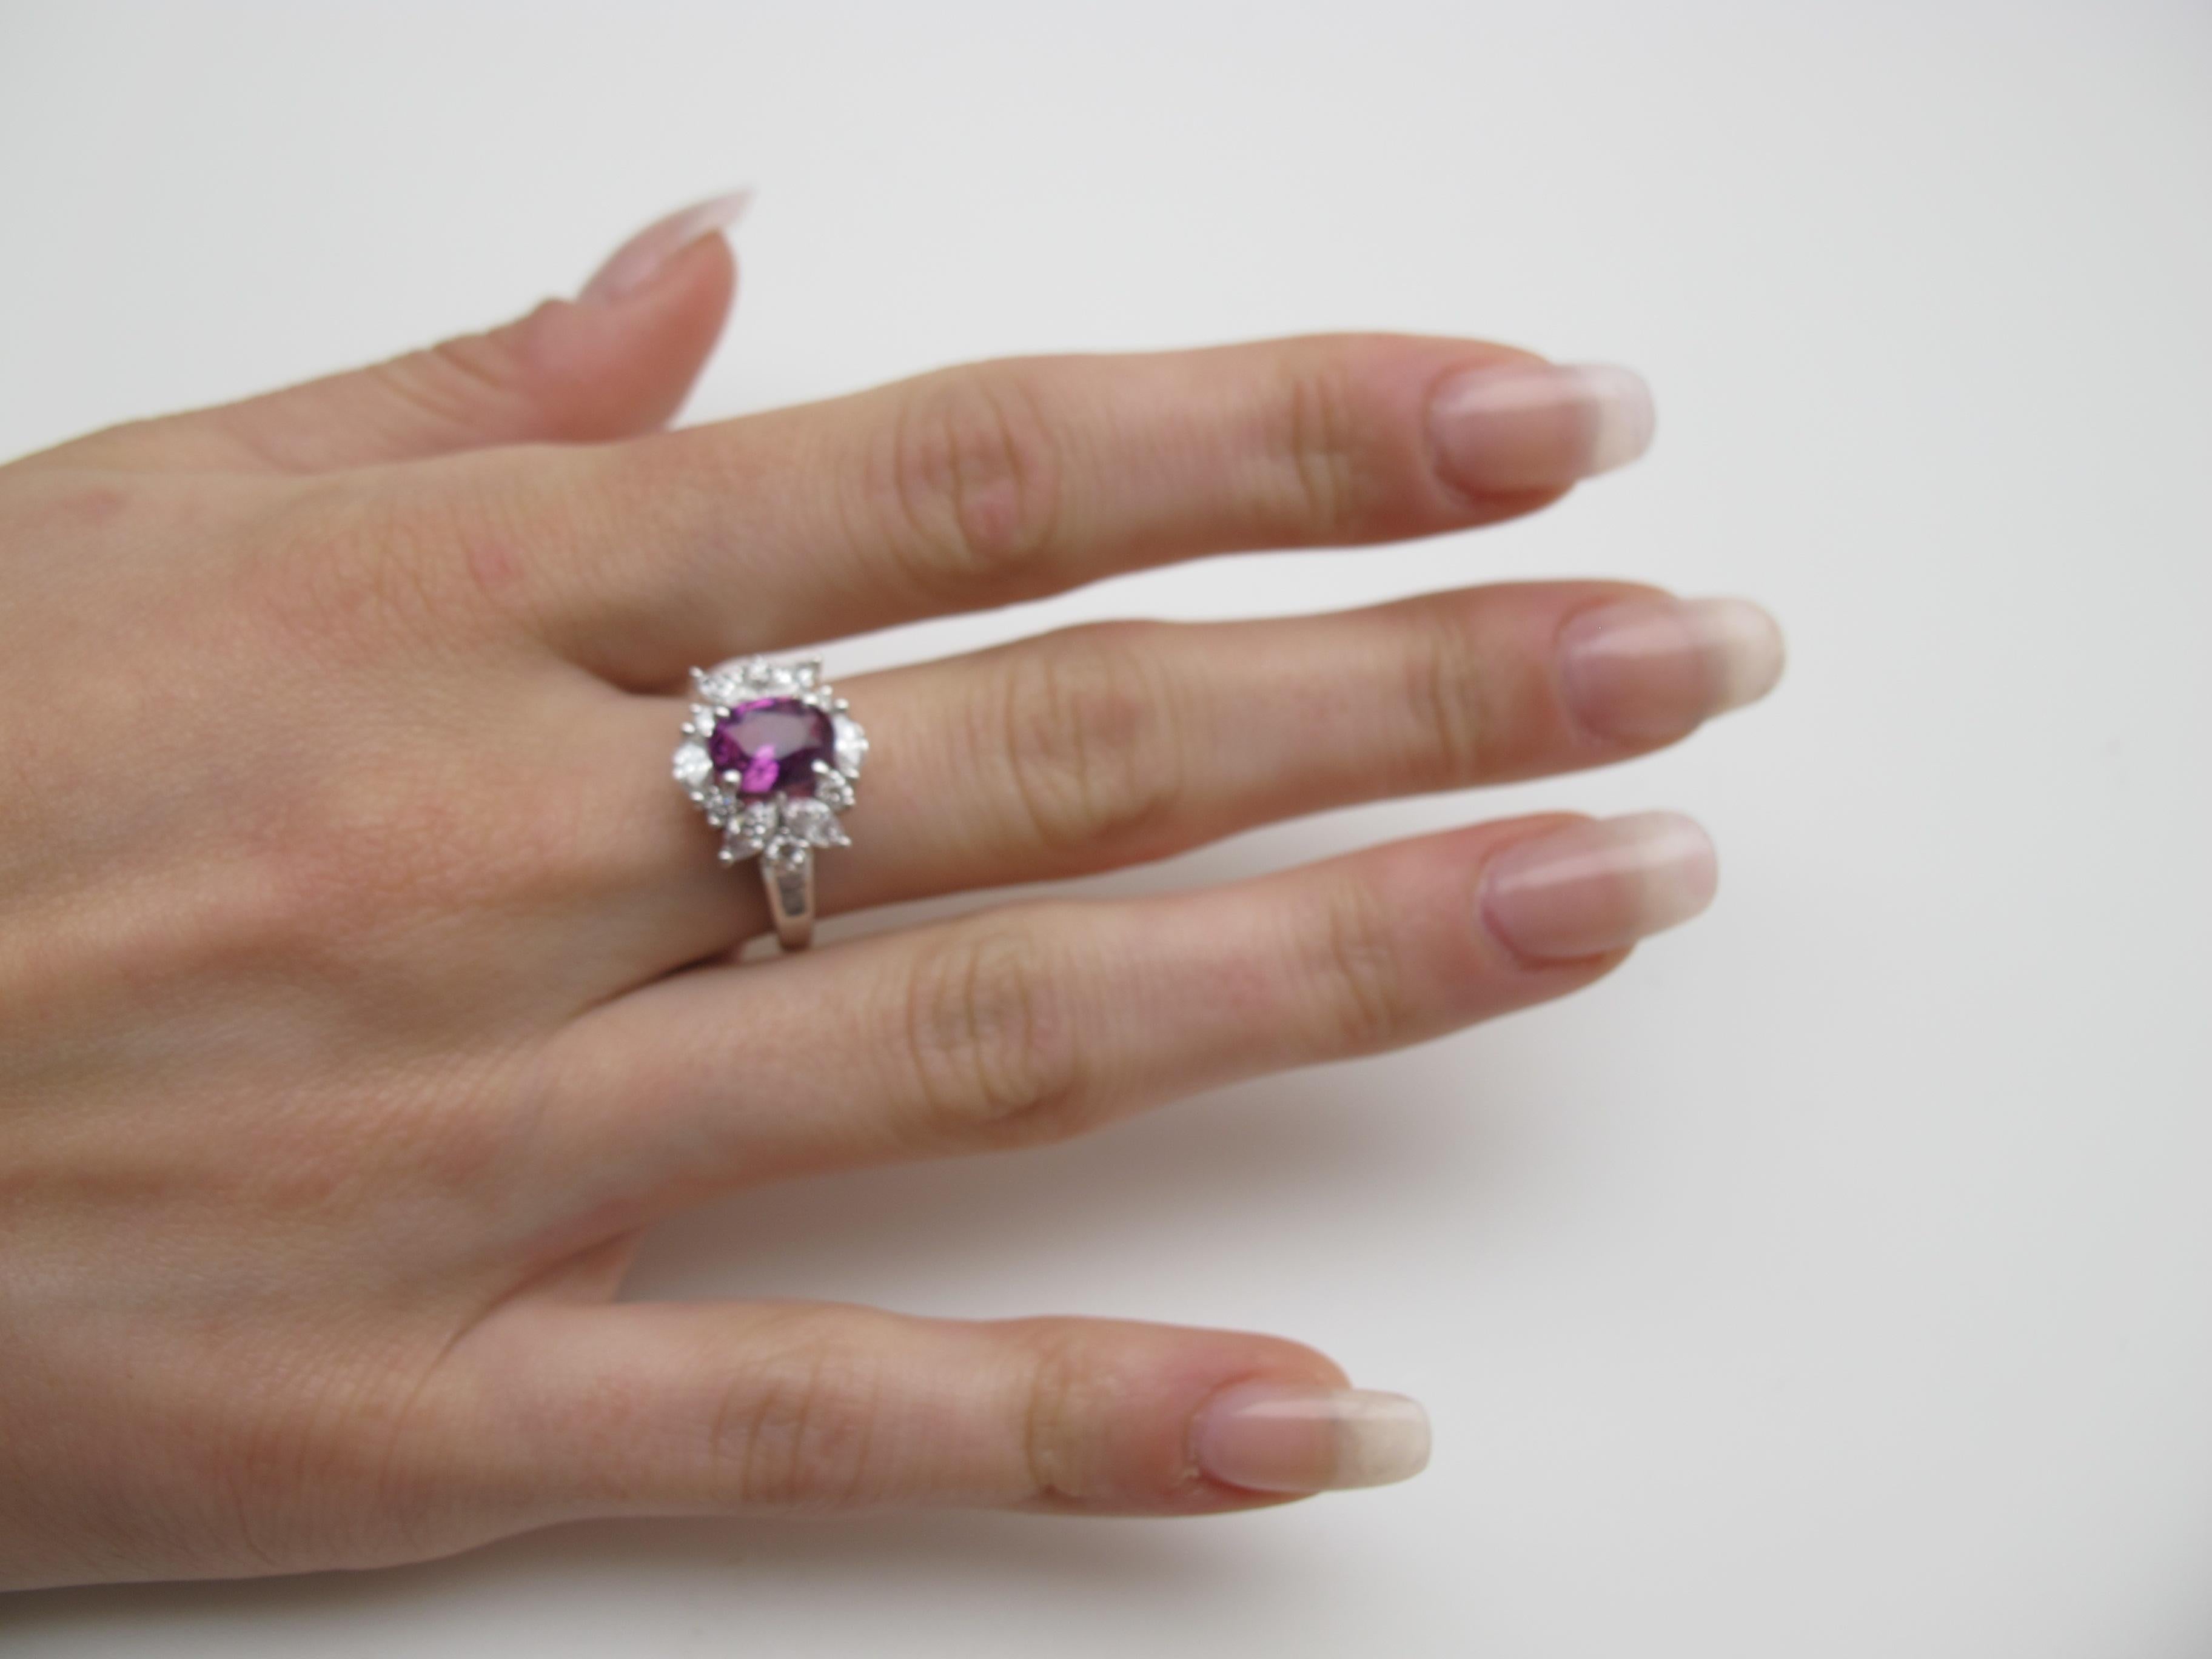 Pretty in pink! This stunning cocktail ring features a 2.27 carat deep pink sapphire of absolutely gem color. Clean, brilliant and beautifully cut, this center stone shines, surrounded by a luxurious arrangement of fine-quality diamonds in round,